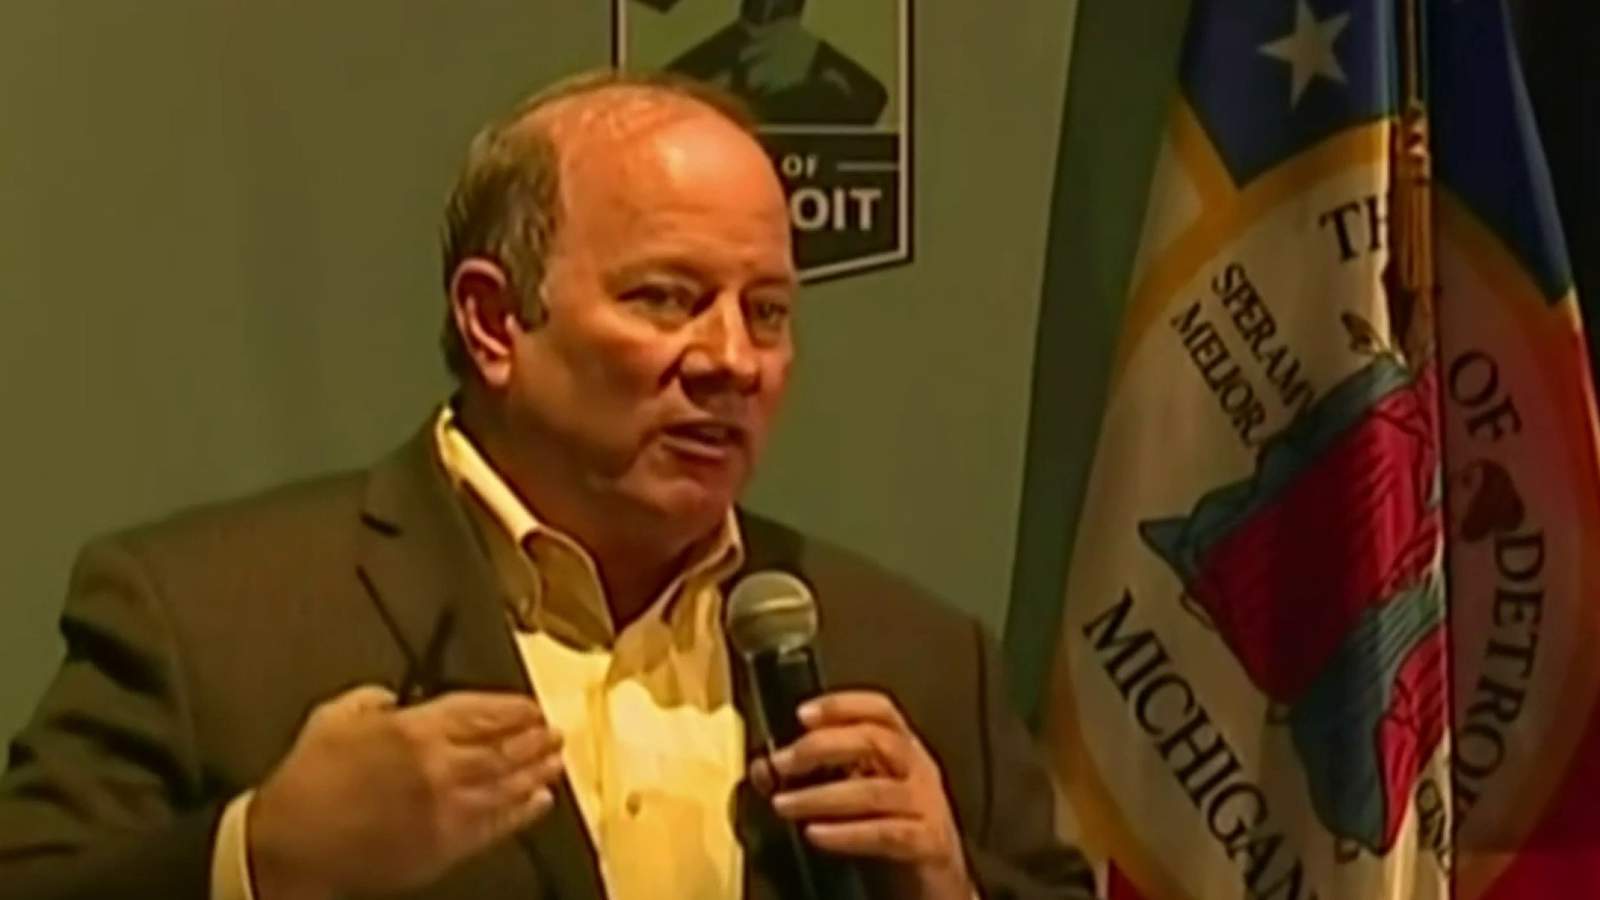 Detroit Mayor Mike Duggan gives update on where city stands in fight against COVID-19